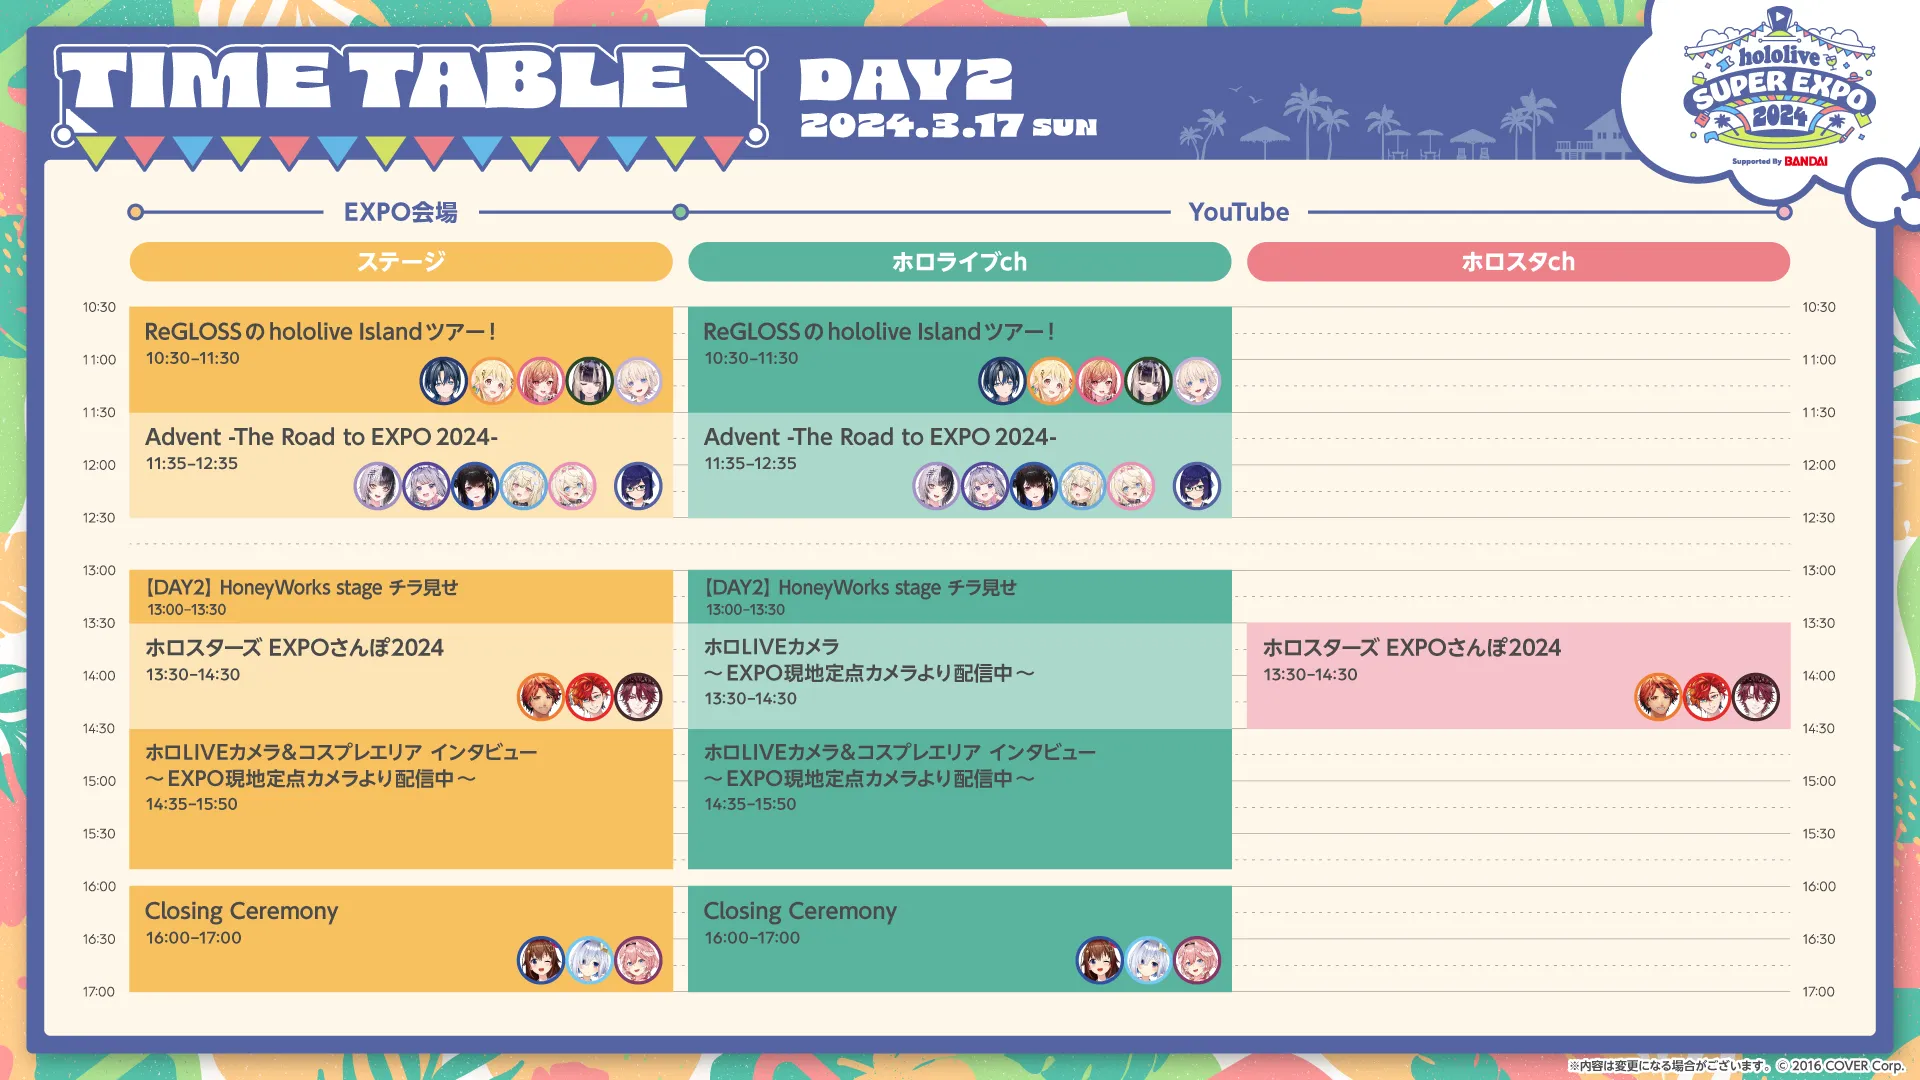 EXPO Stage タイムテーブル DAY2